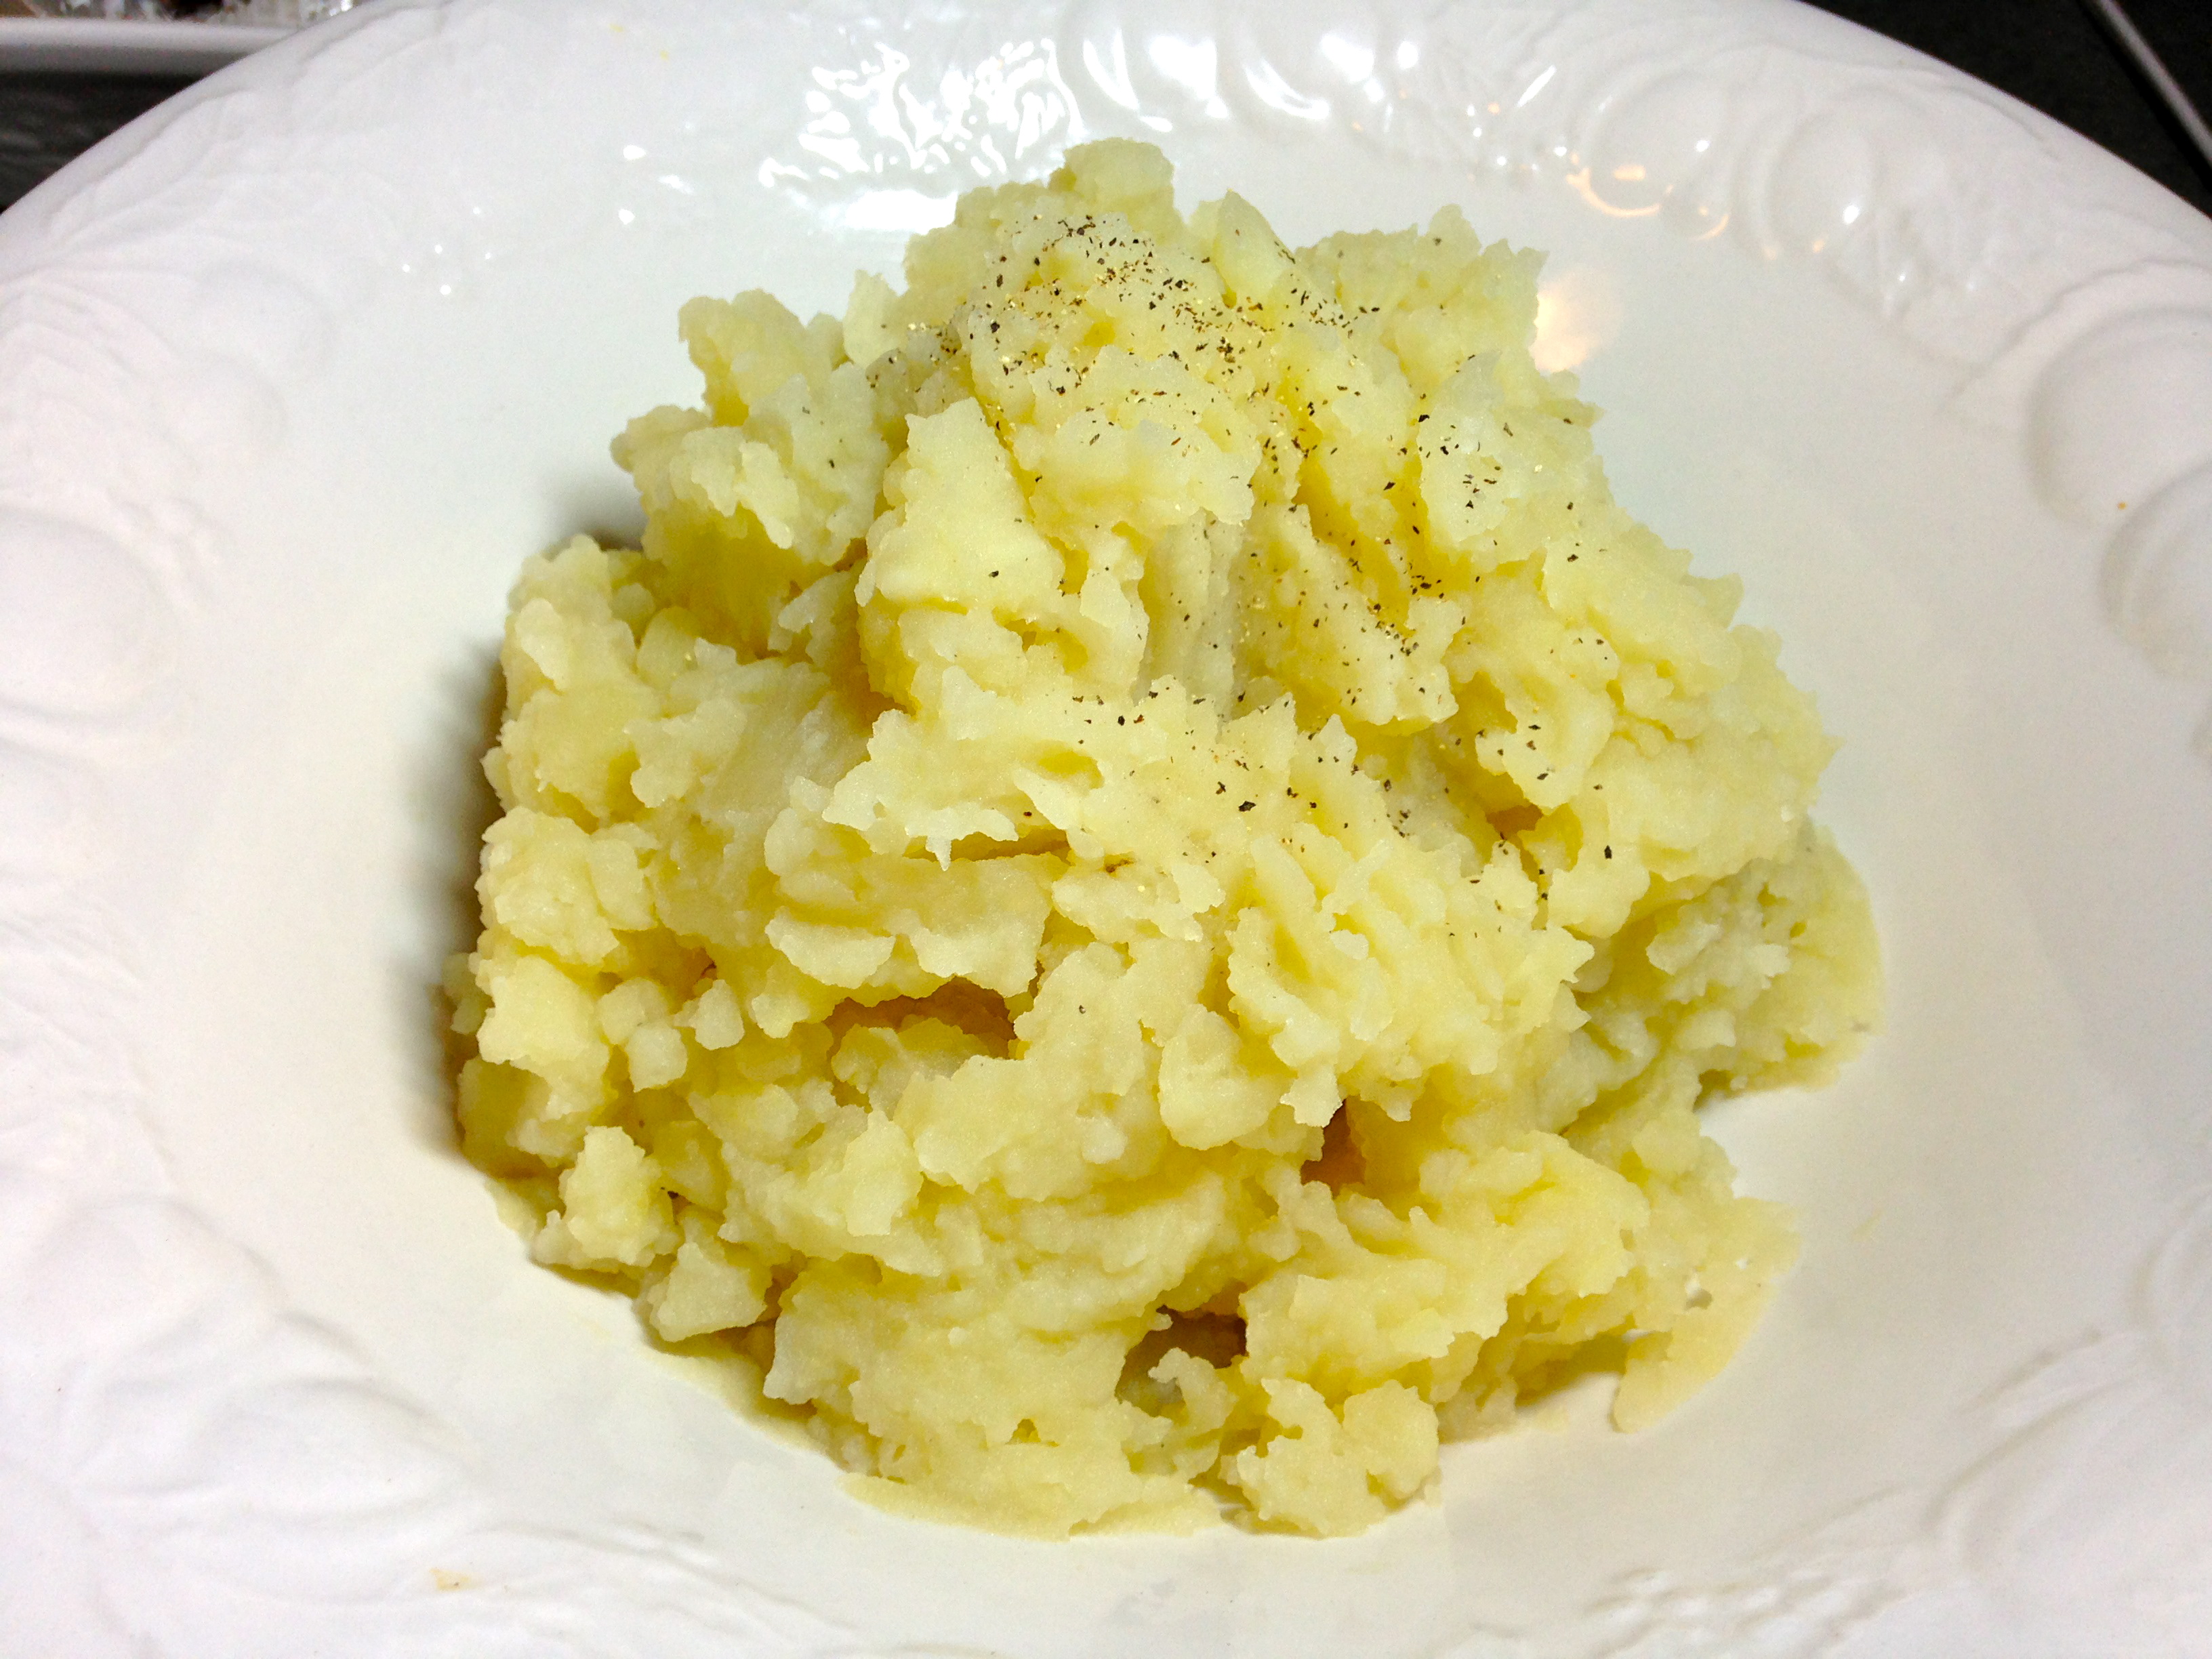 Healthy Mashed Potatoes: A Delicious, Low-Fat, Gluten-Free, Whole Food!